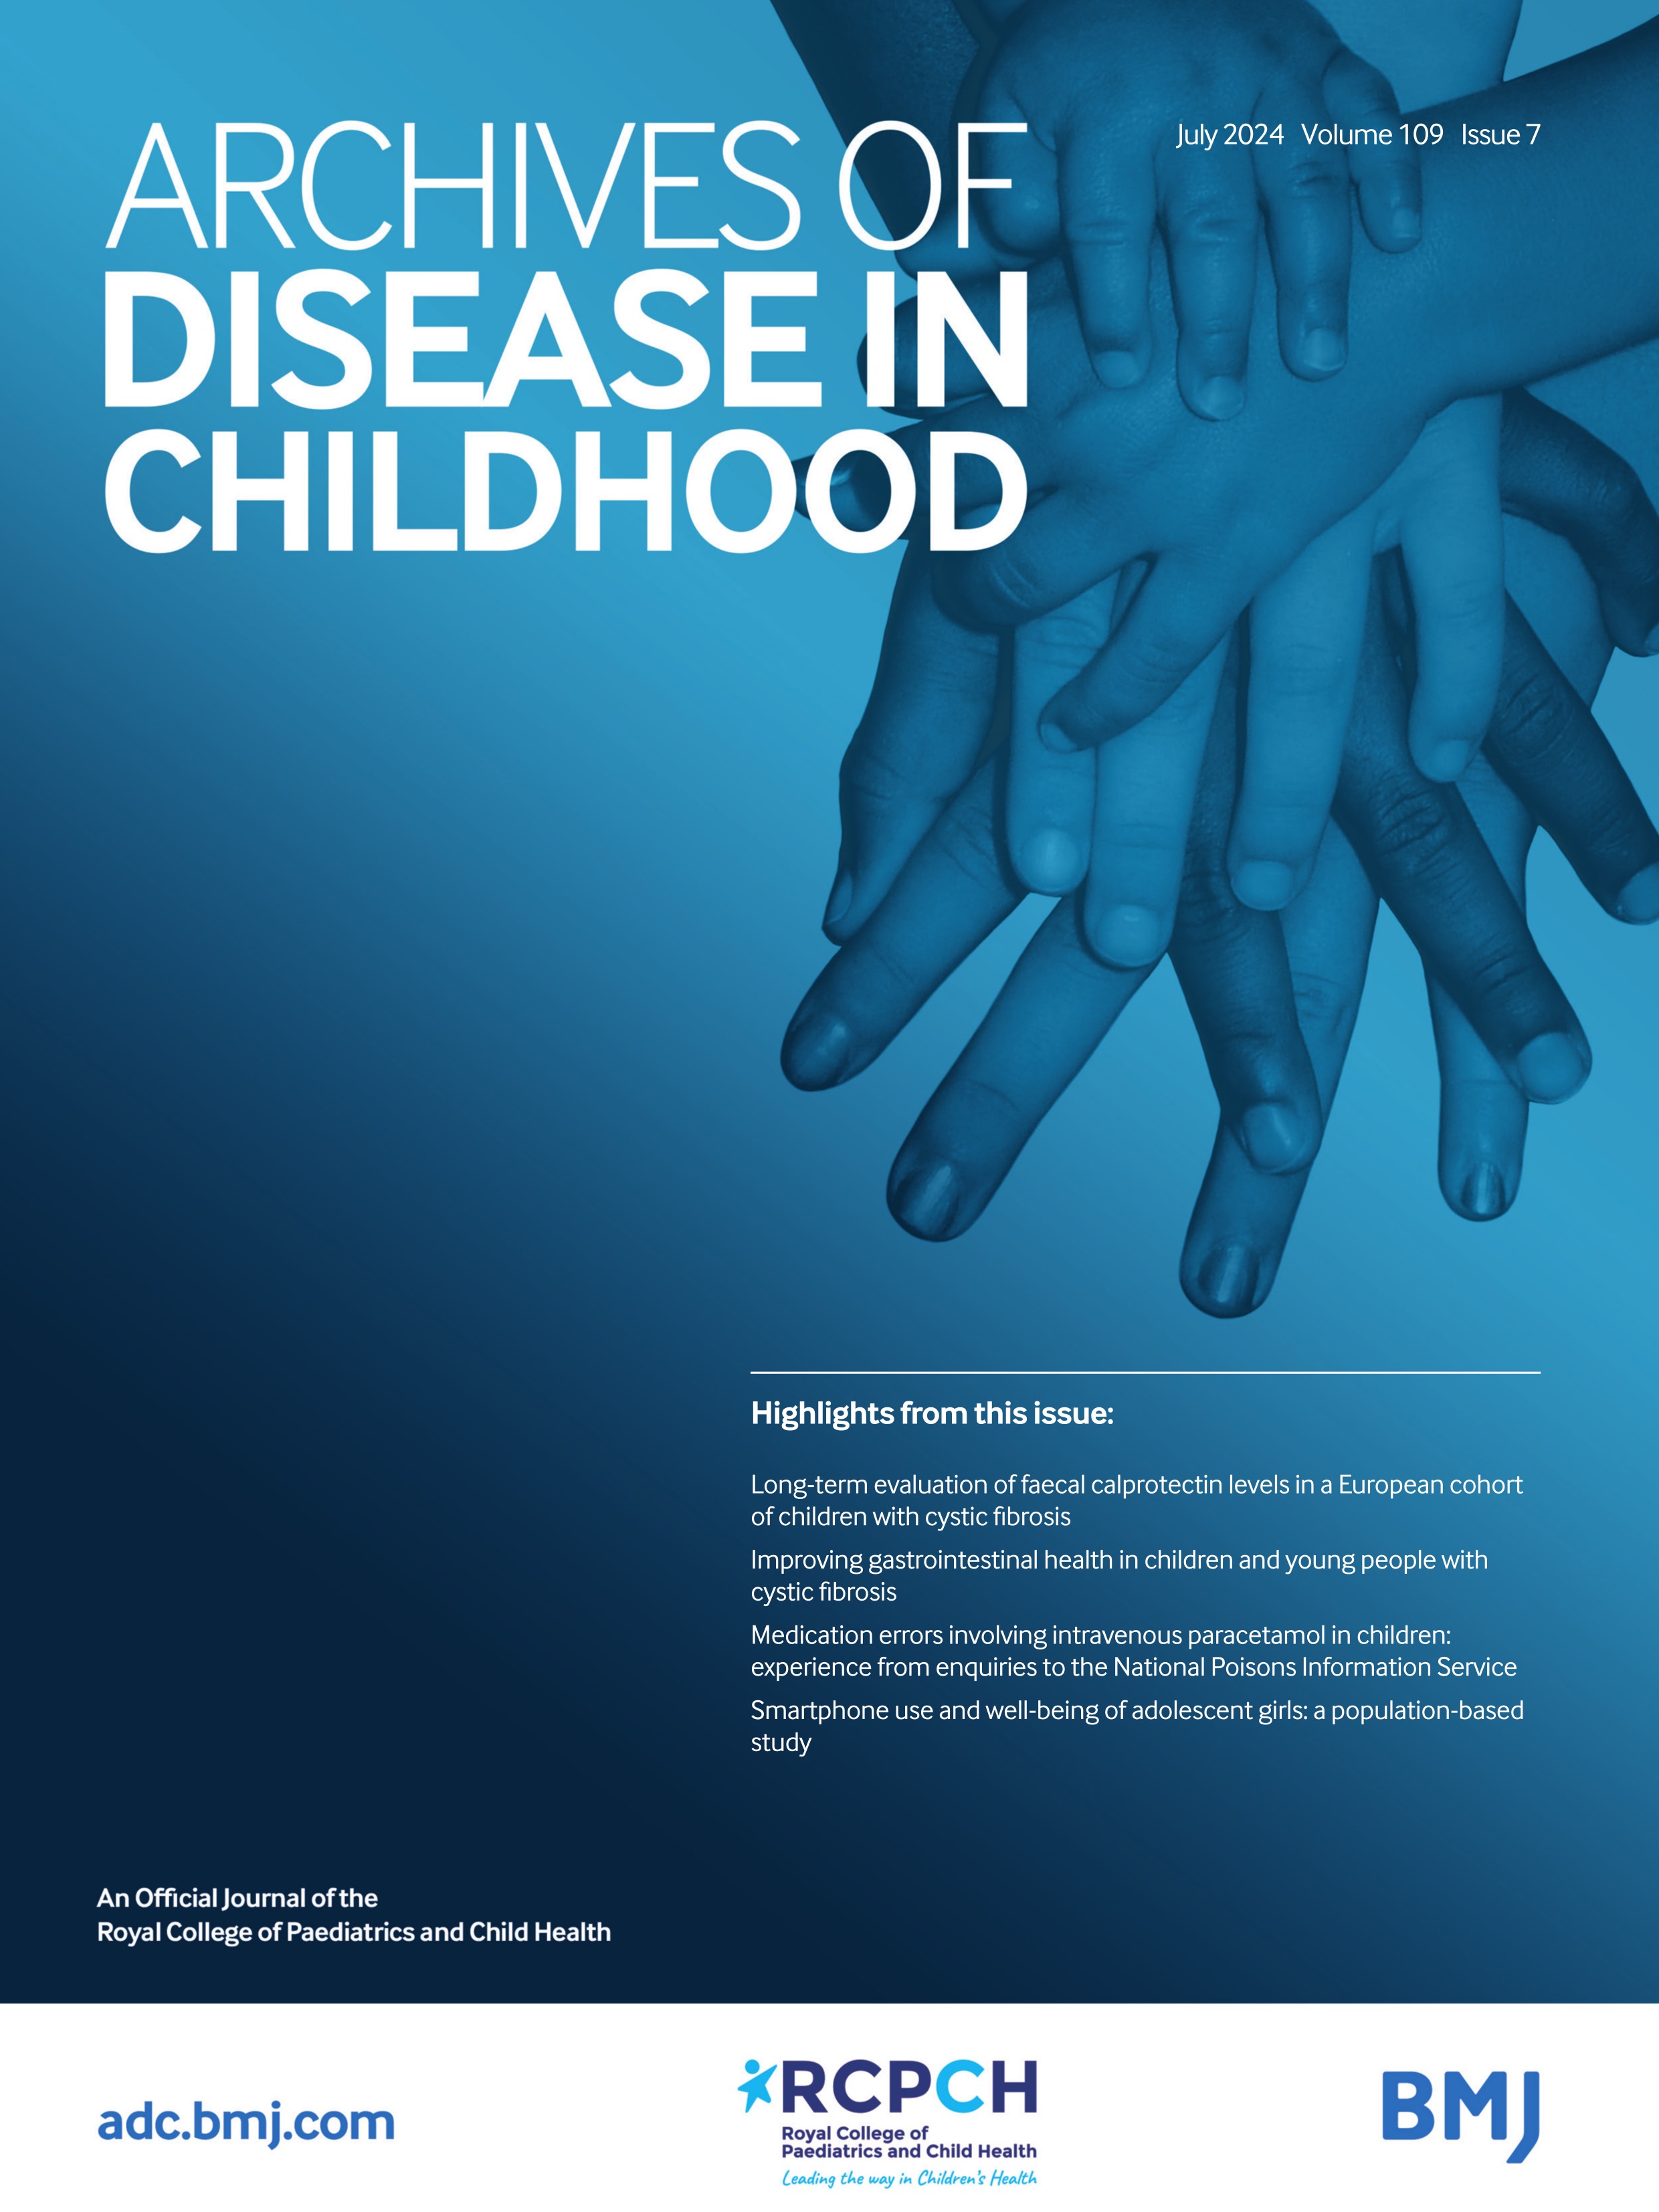 Medication errors involving intravenous paracetamol in children: experience from enquiries to the National Poisons Information Service